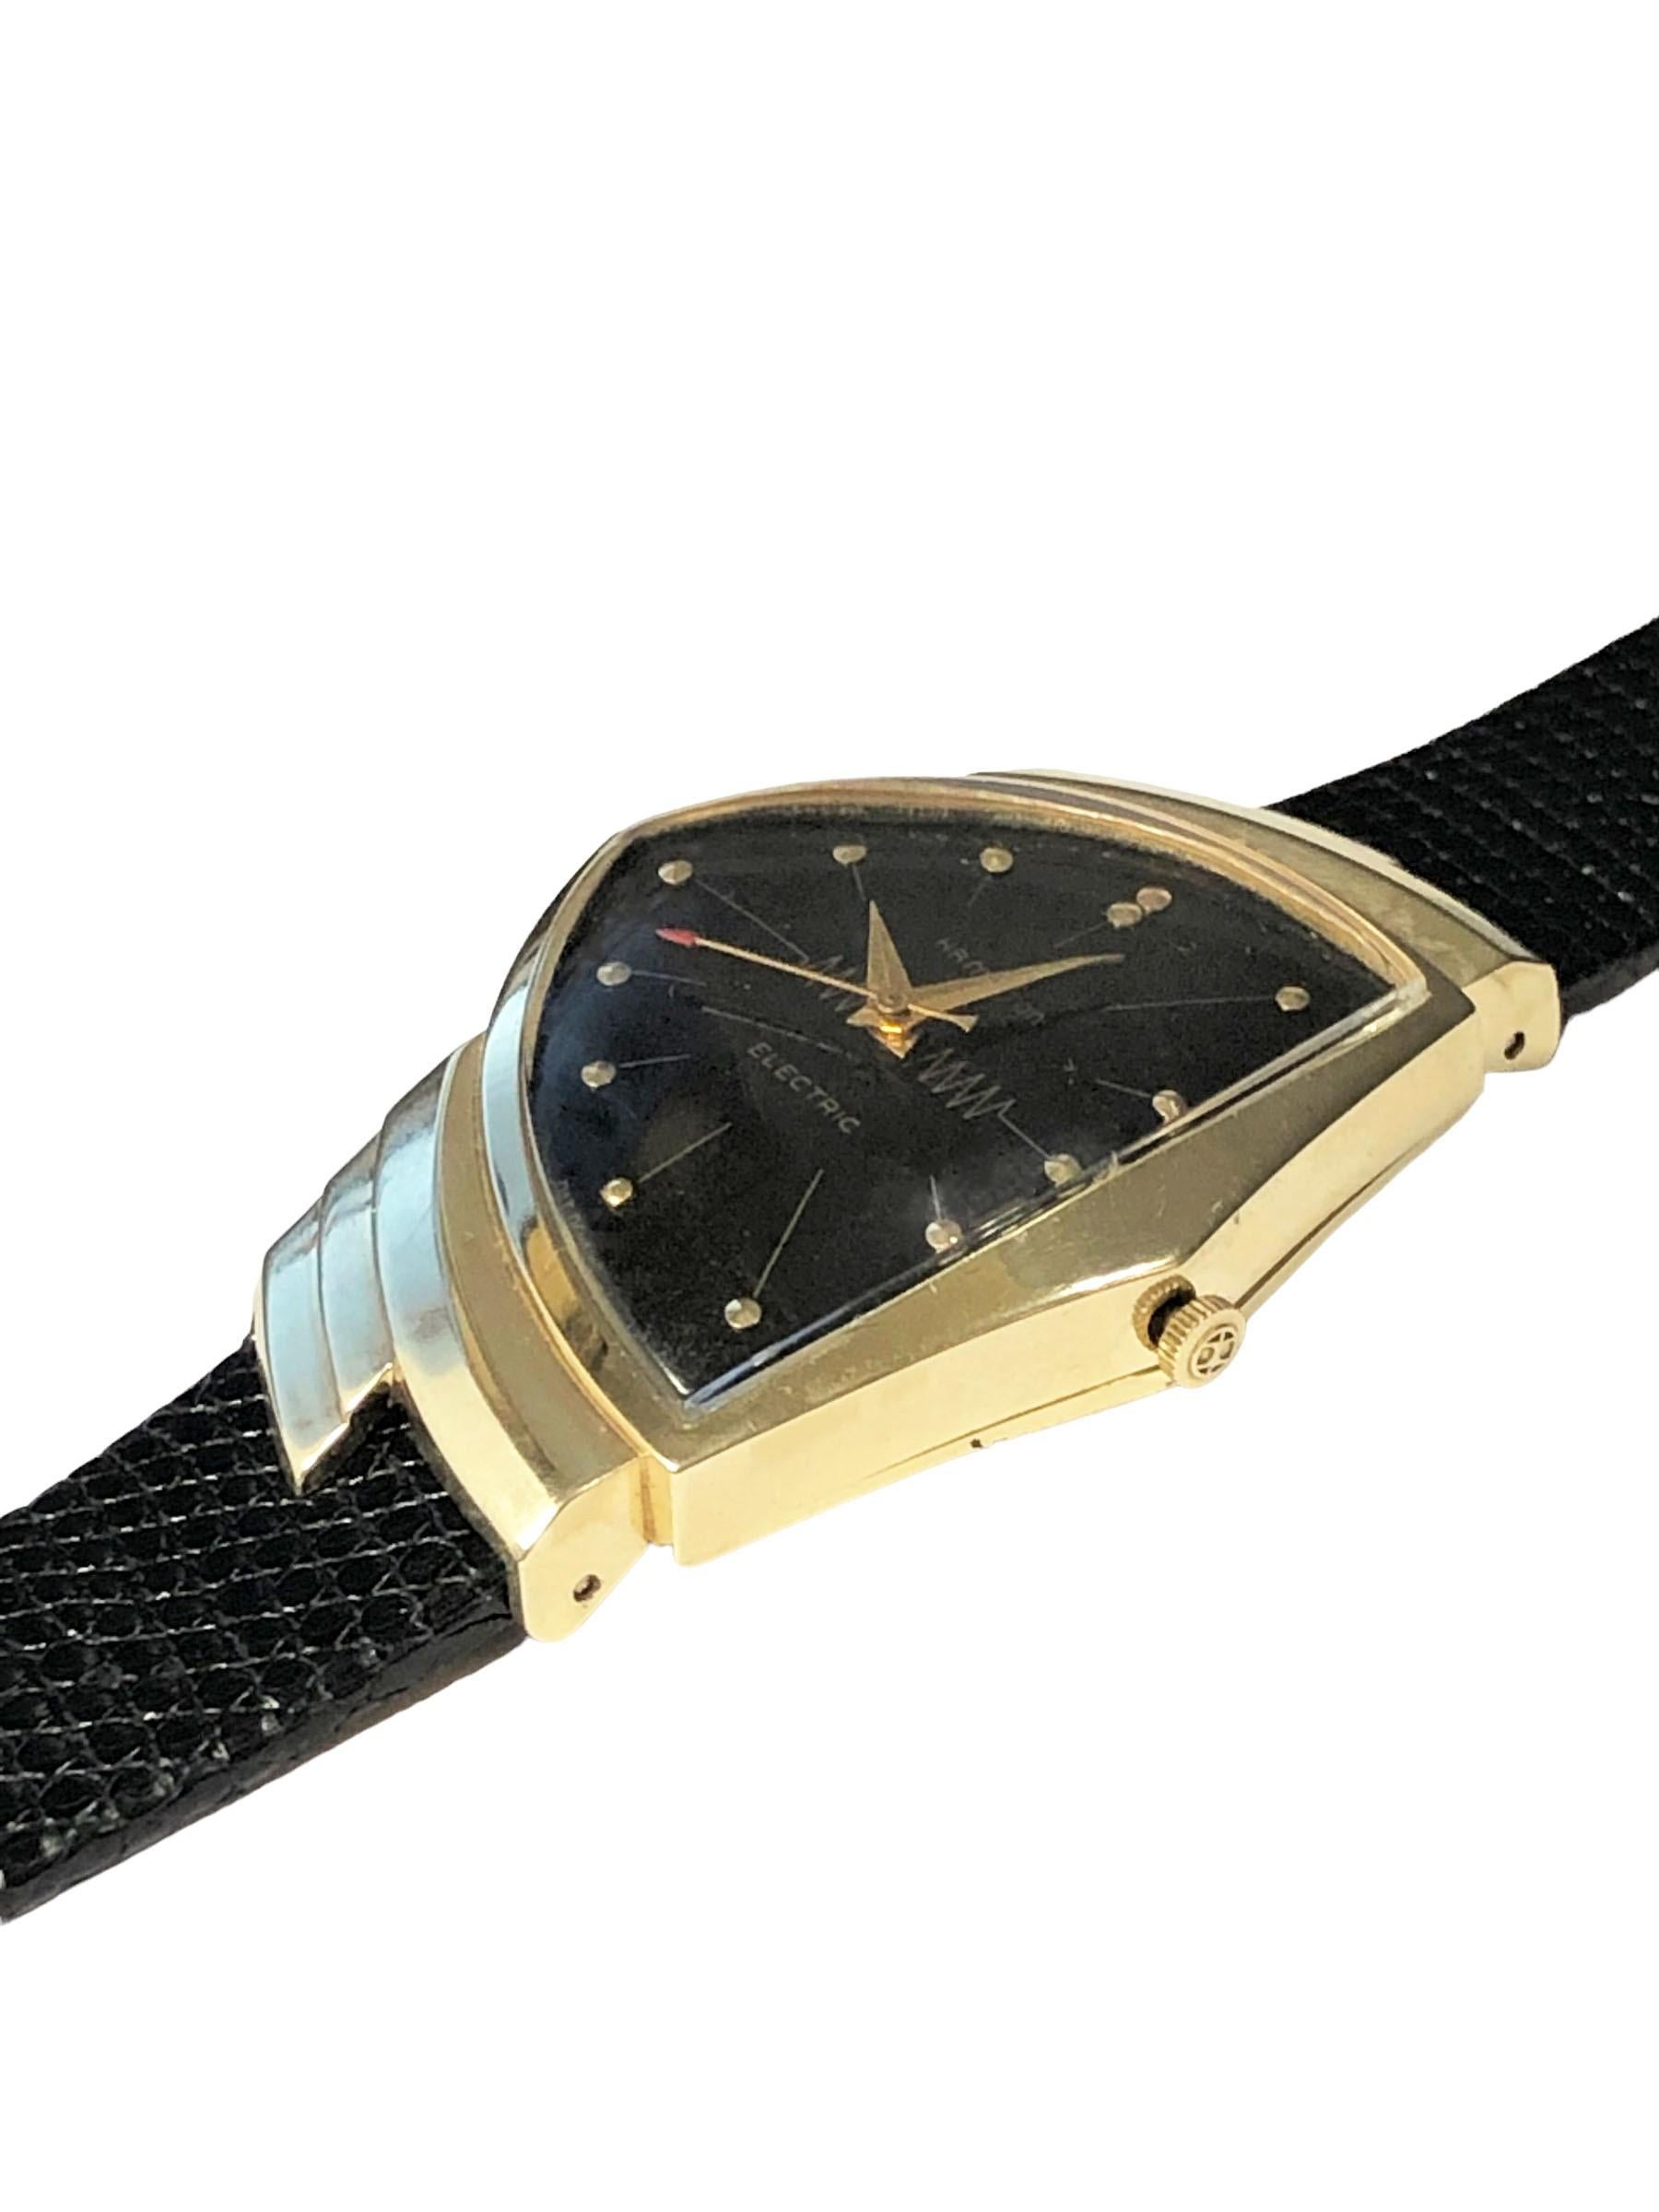 Circa 1960 Hamilton Electric Ventura Wrist Watch, 14k Yellow Gold 2 piece case, Hamilton 505 Electronic movement, Black dial with raised gold markers and a sweep seconds hand. New Black Lizard strap, comes with a Hamilton Electric information and